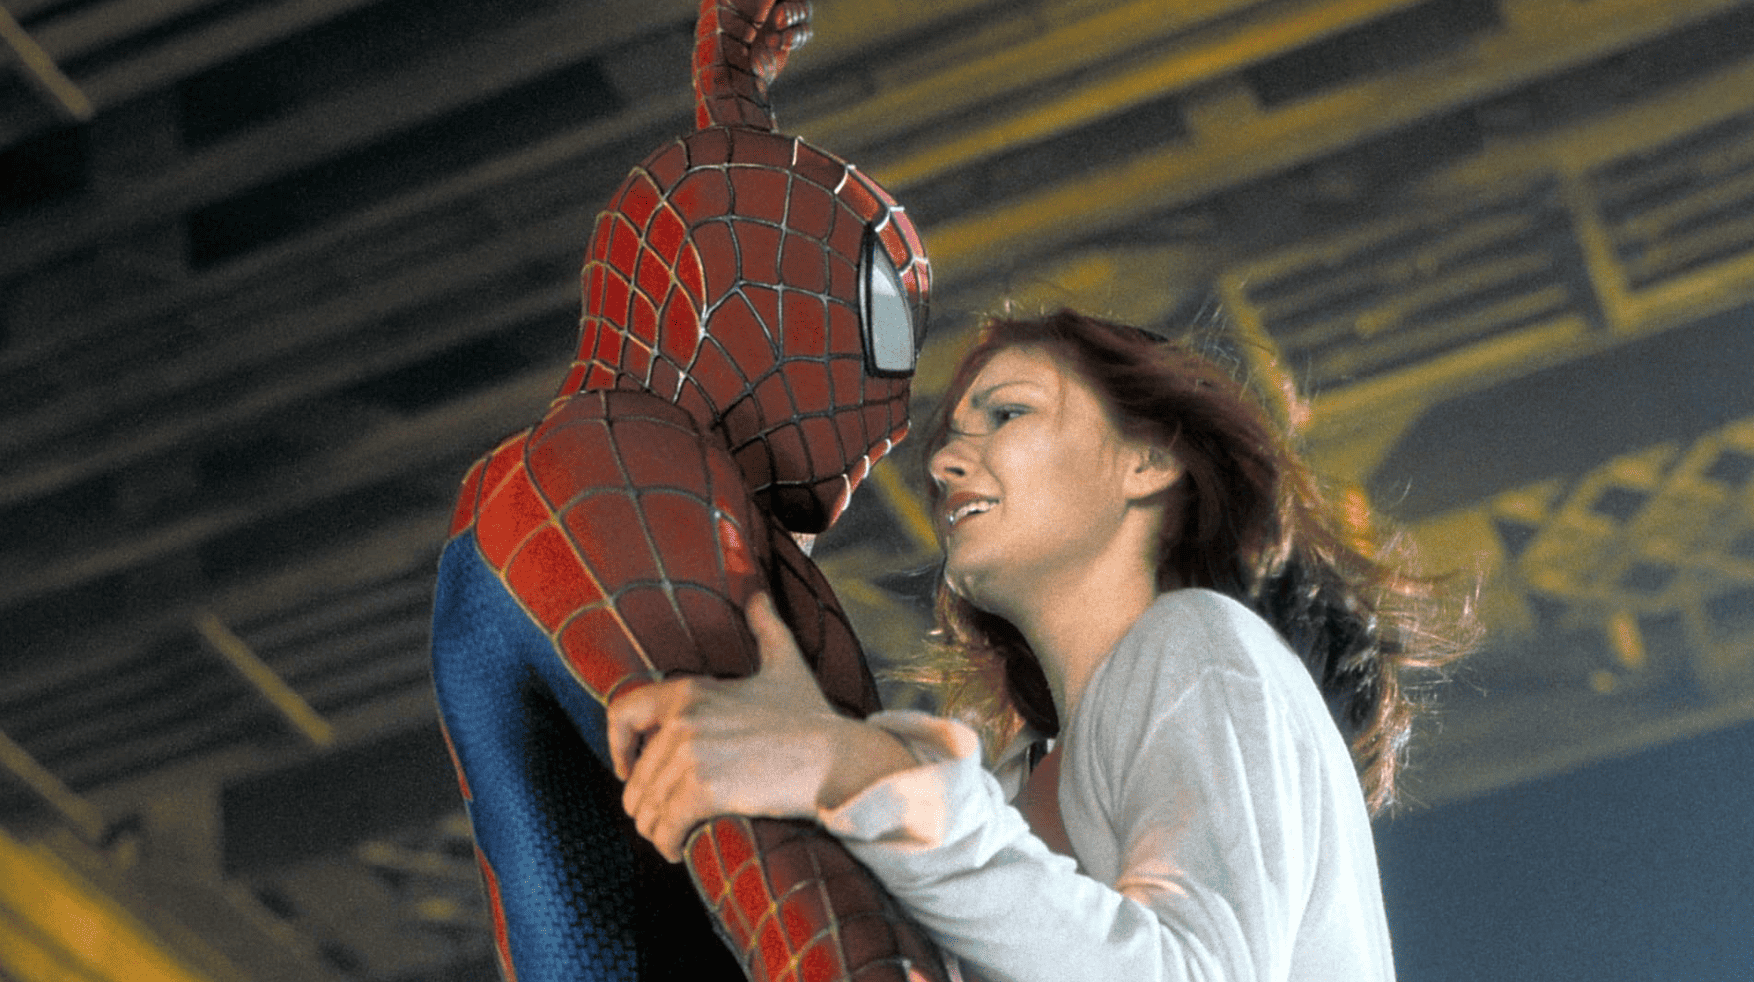 Spider-Man catching Mary Jane while hanging from his spiderweb in this image from Columbia Pictures